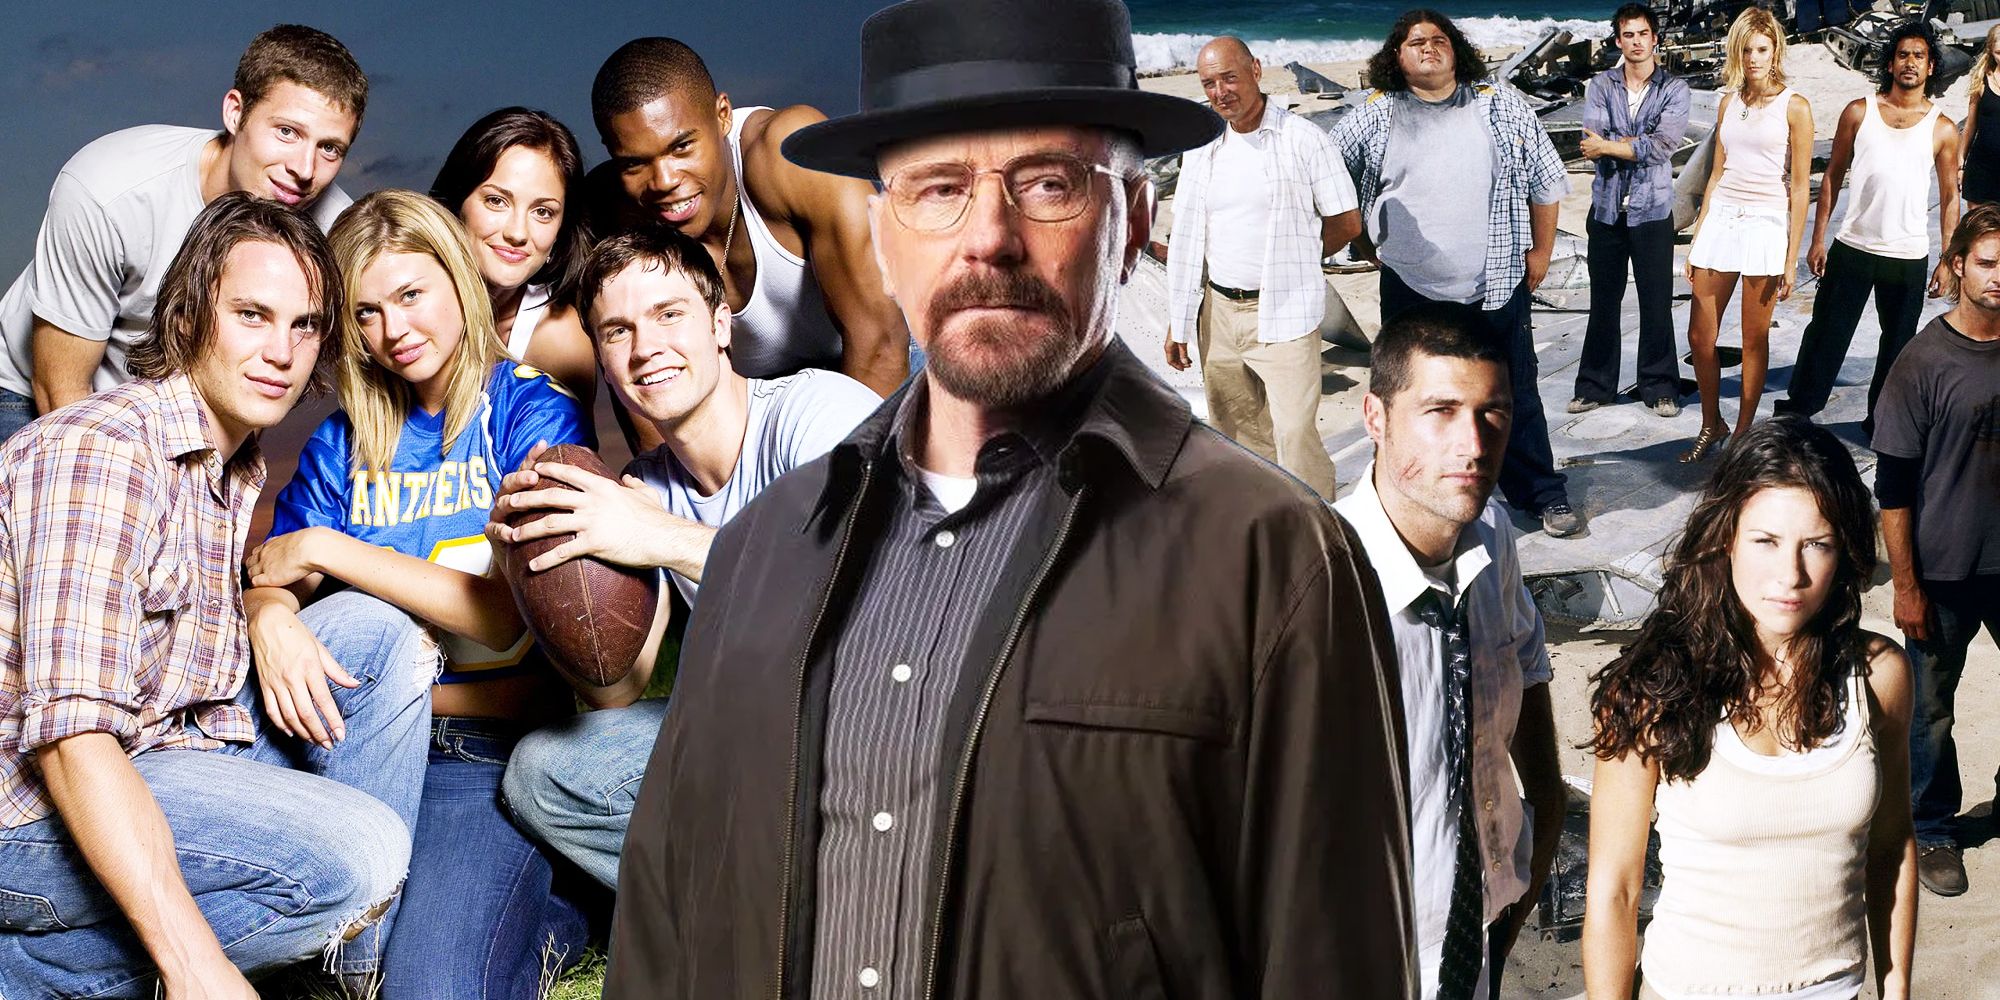 Breaking Bad, Friday Night Lights, and Lost